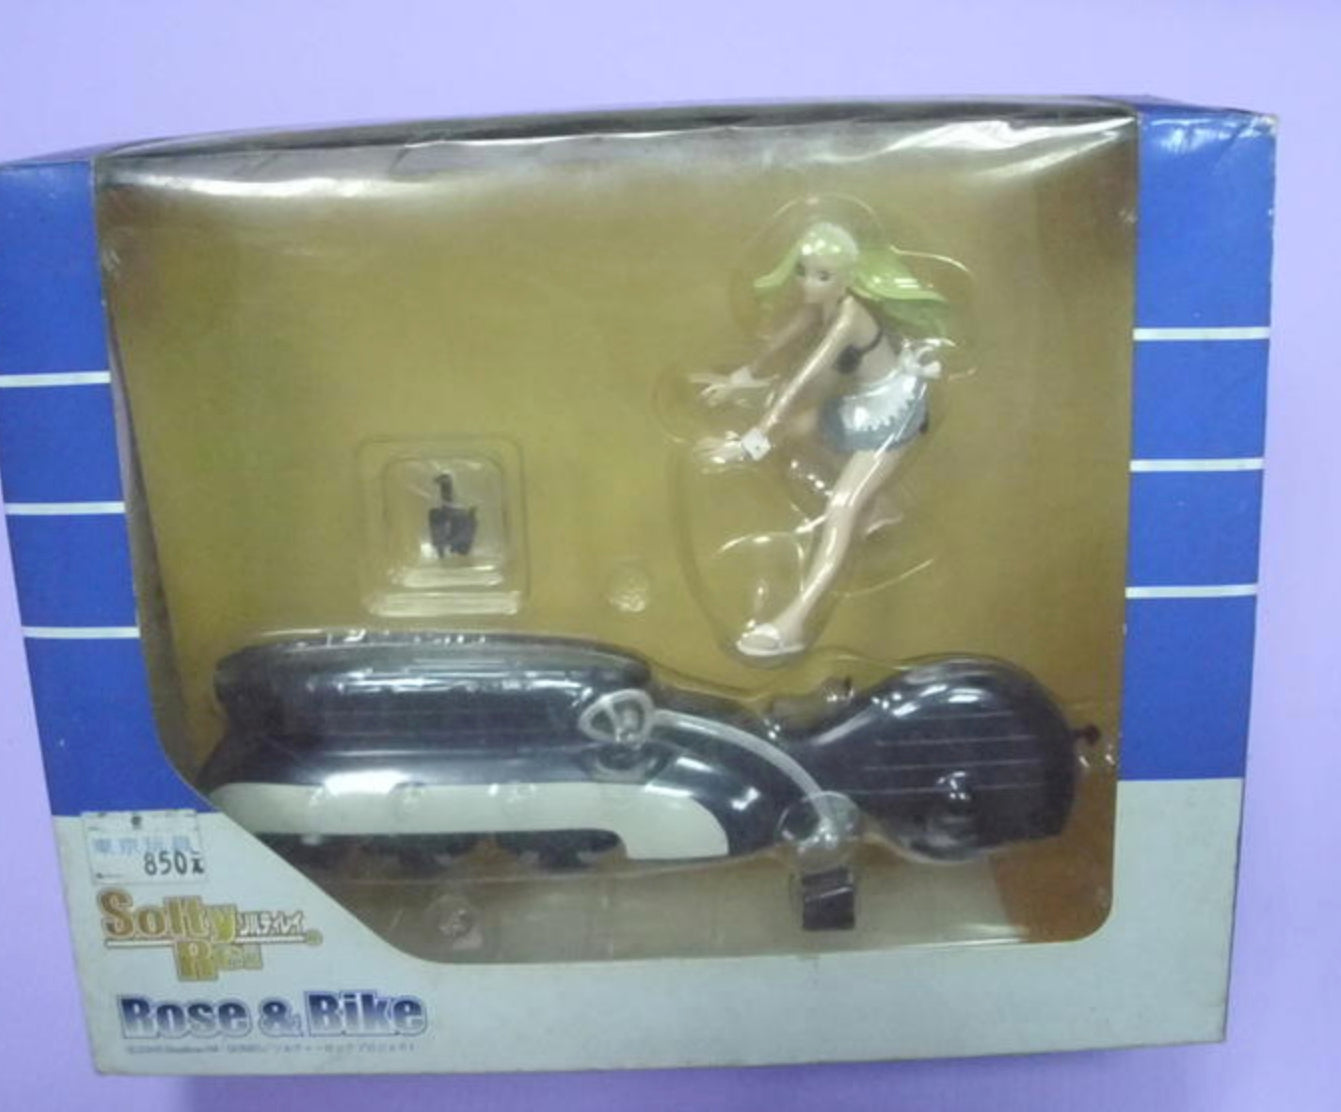 Vice Solty Rei Rose & Bike Black ver Pvc Collection Figure